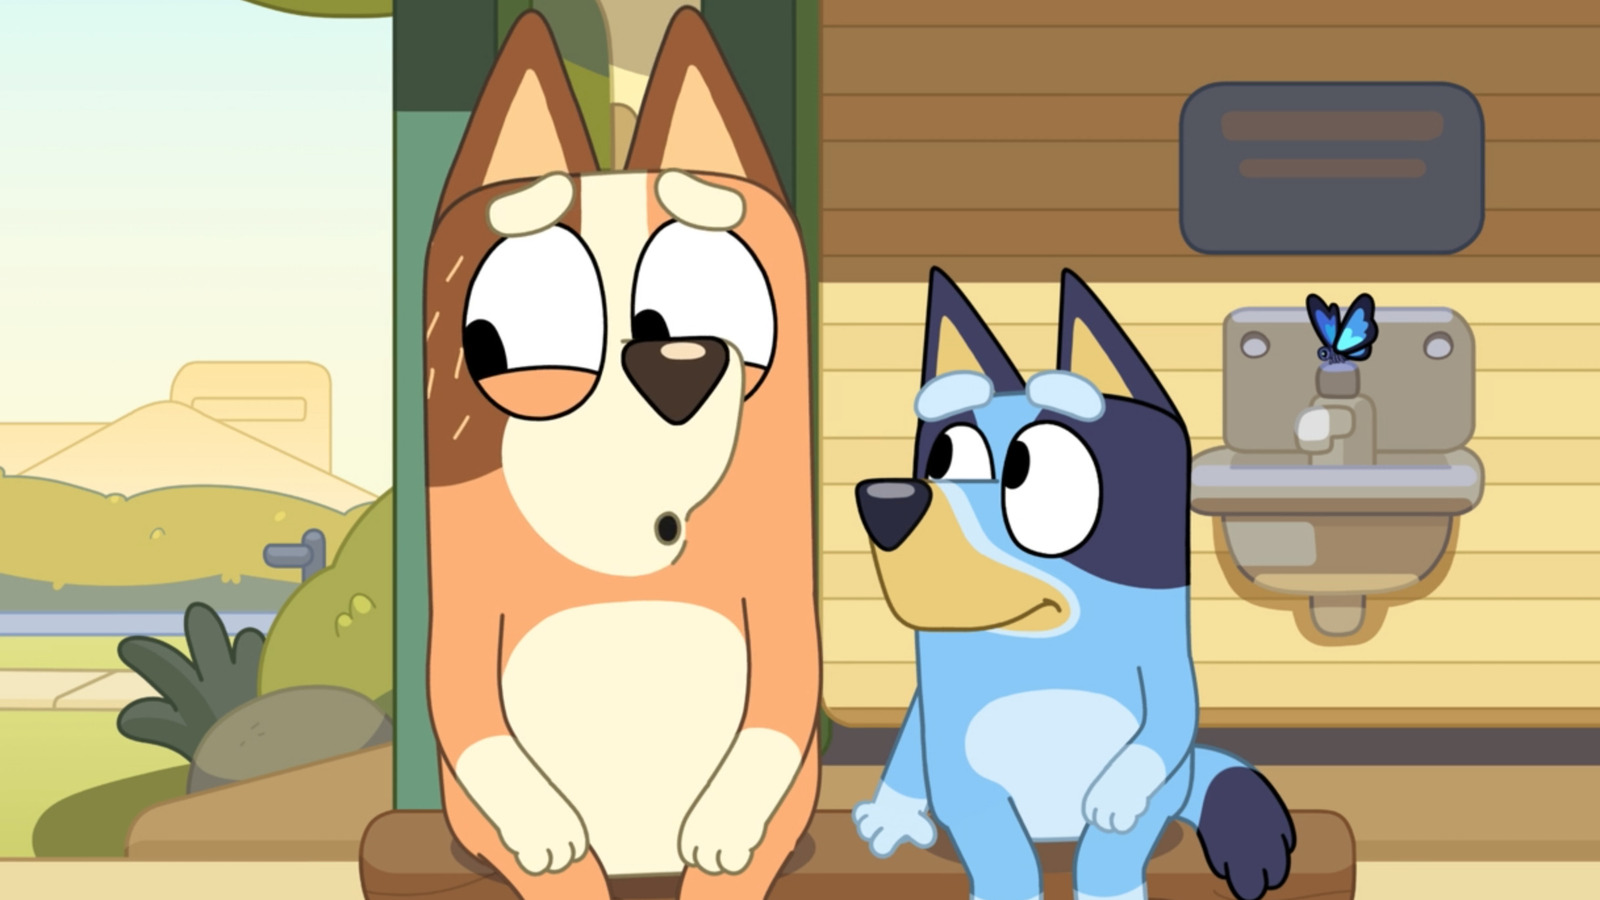 Discover Why Bluey’s Newest Episode ‘The Sign’ Is Sending Parents into a Tailspin